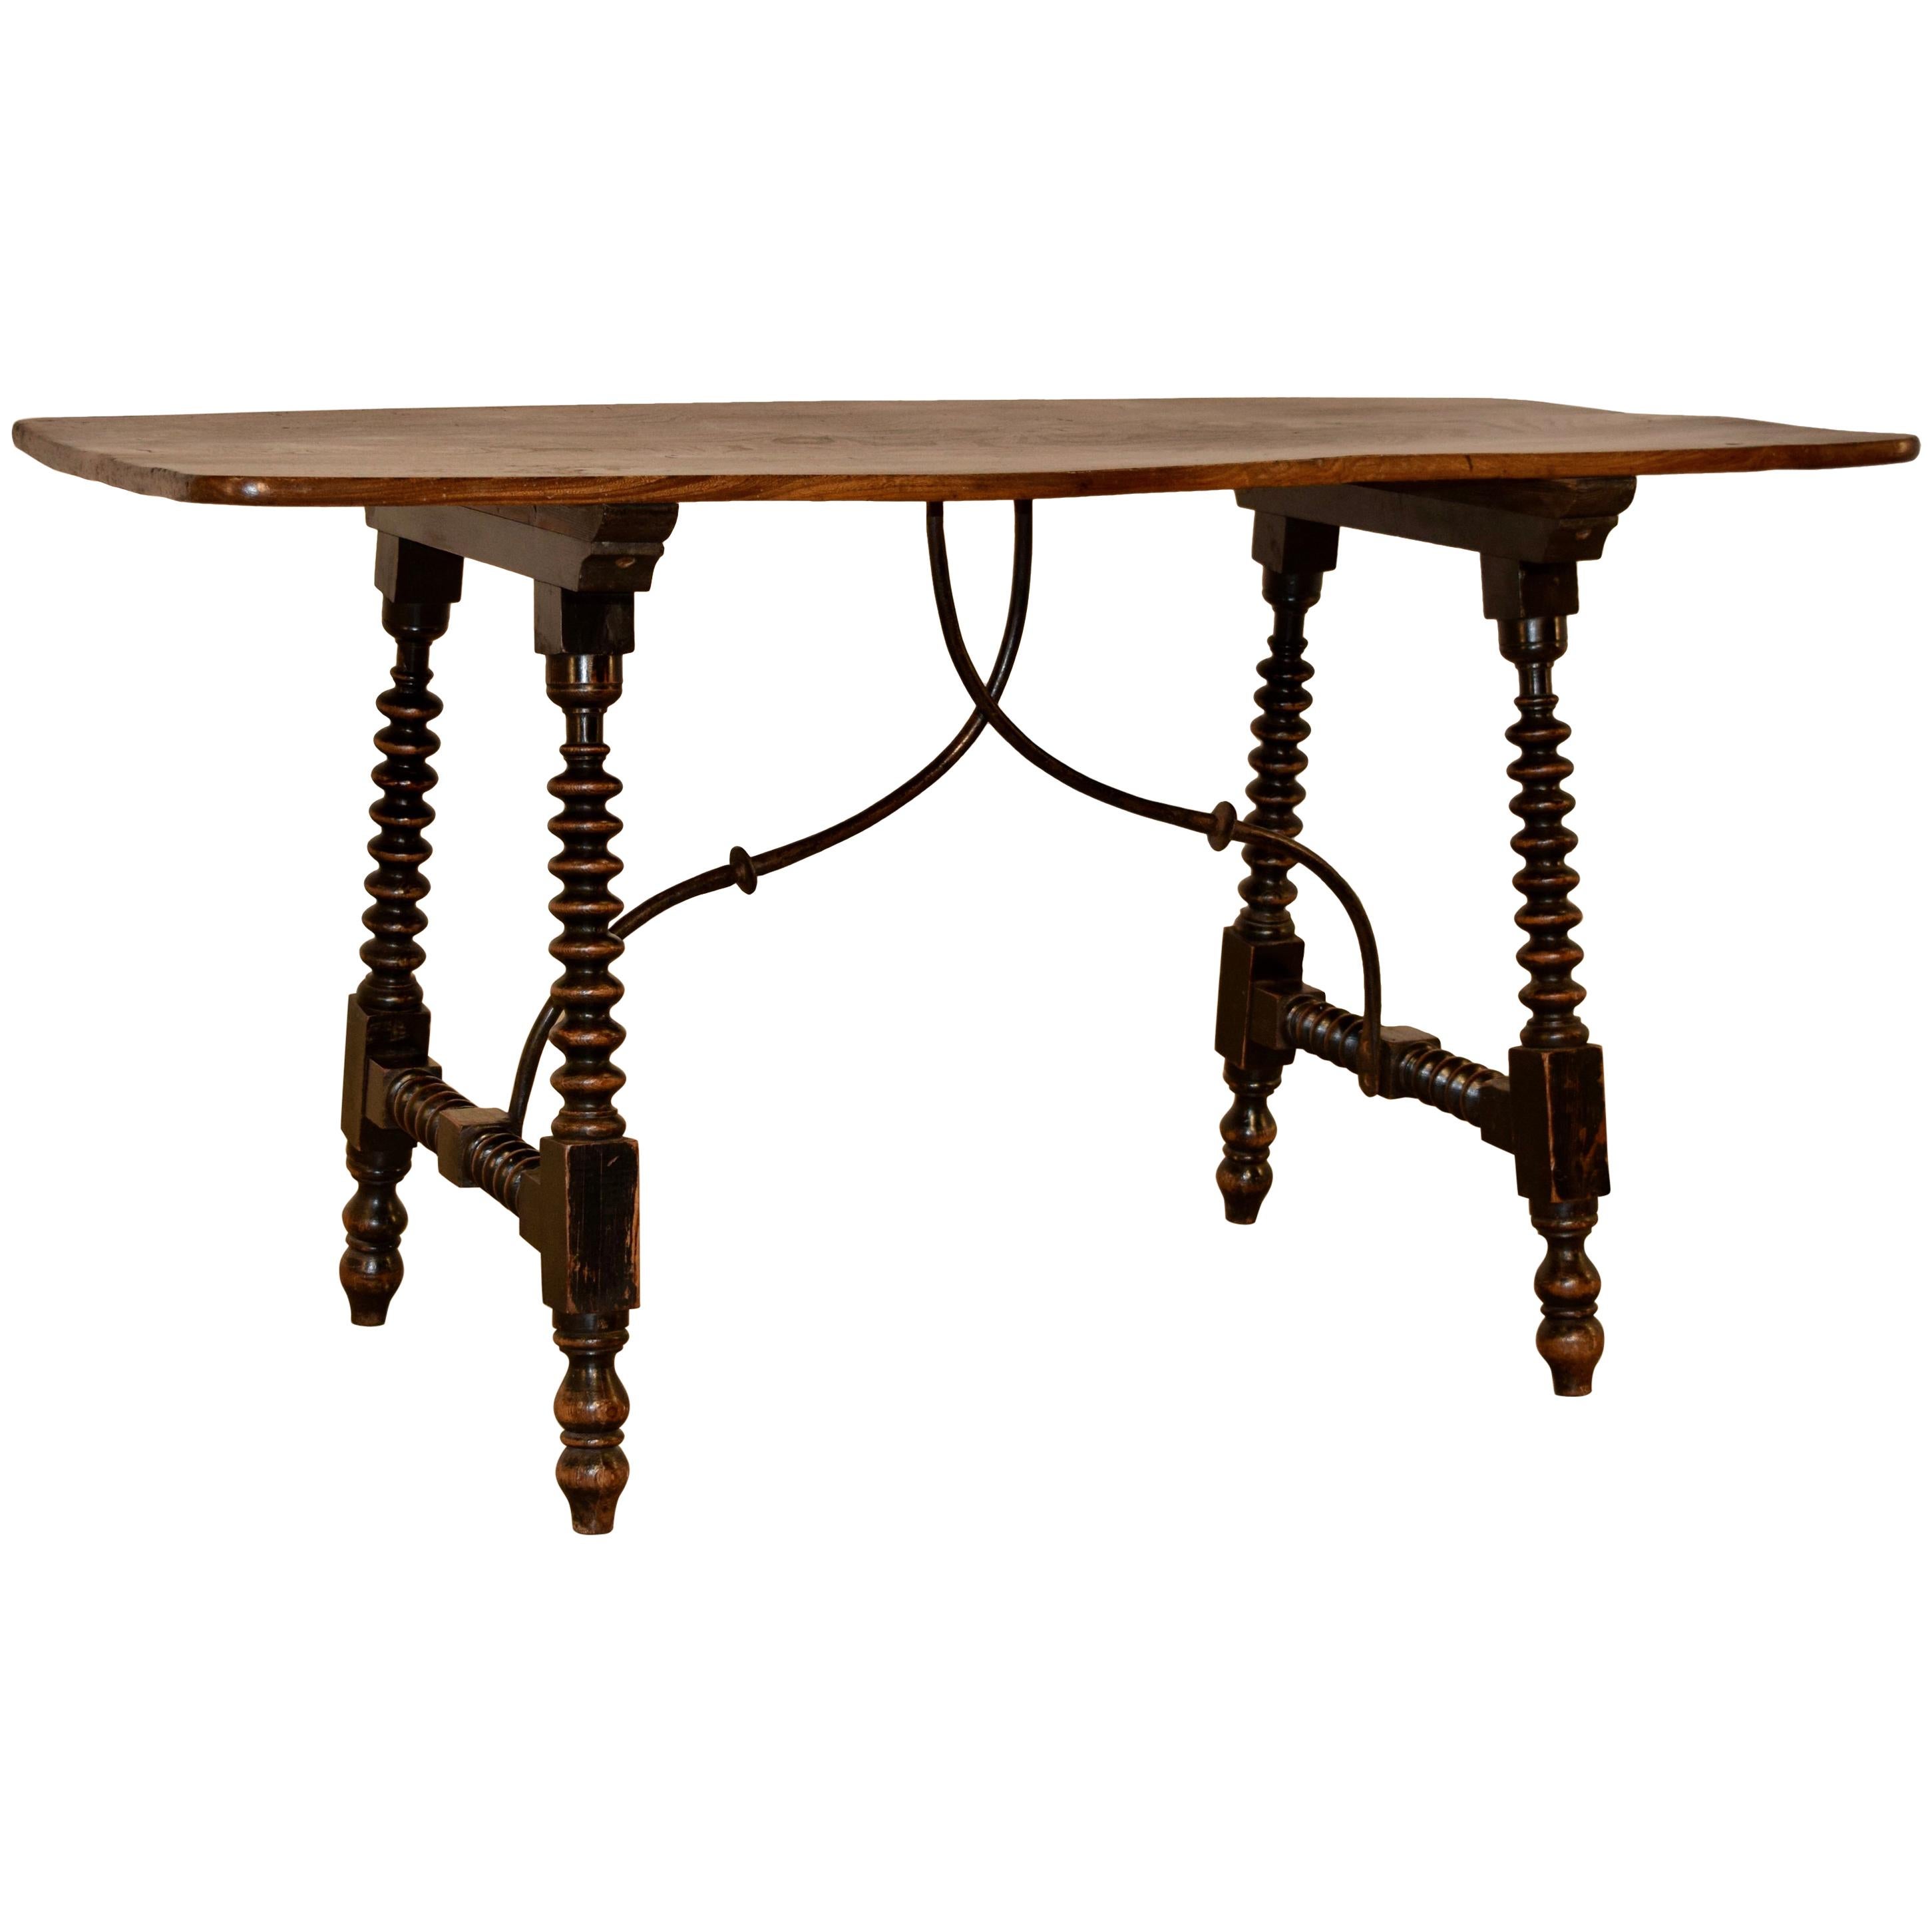 19th Century Spanish Table with Iron Stretcher